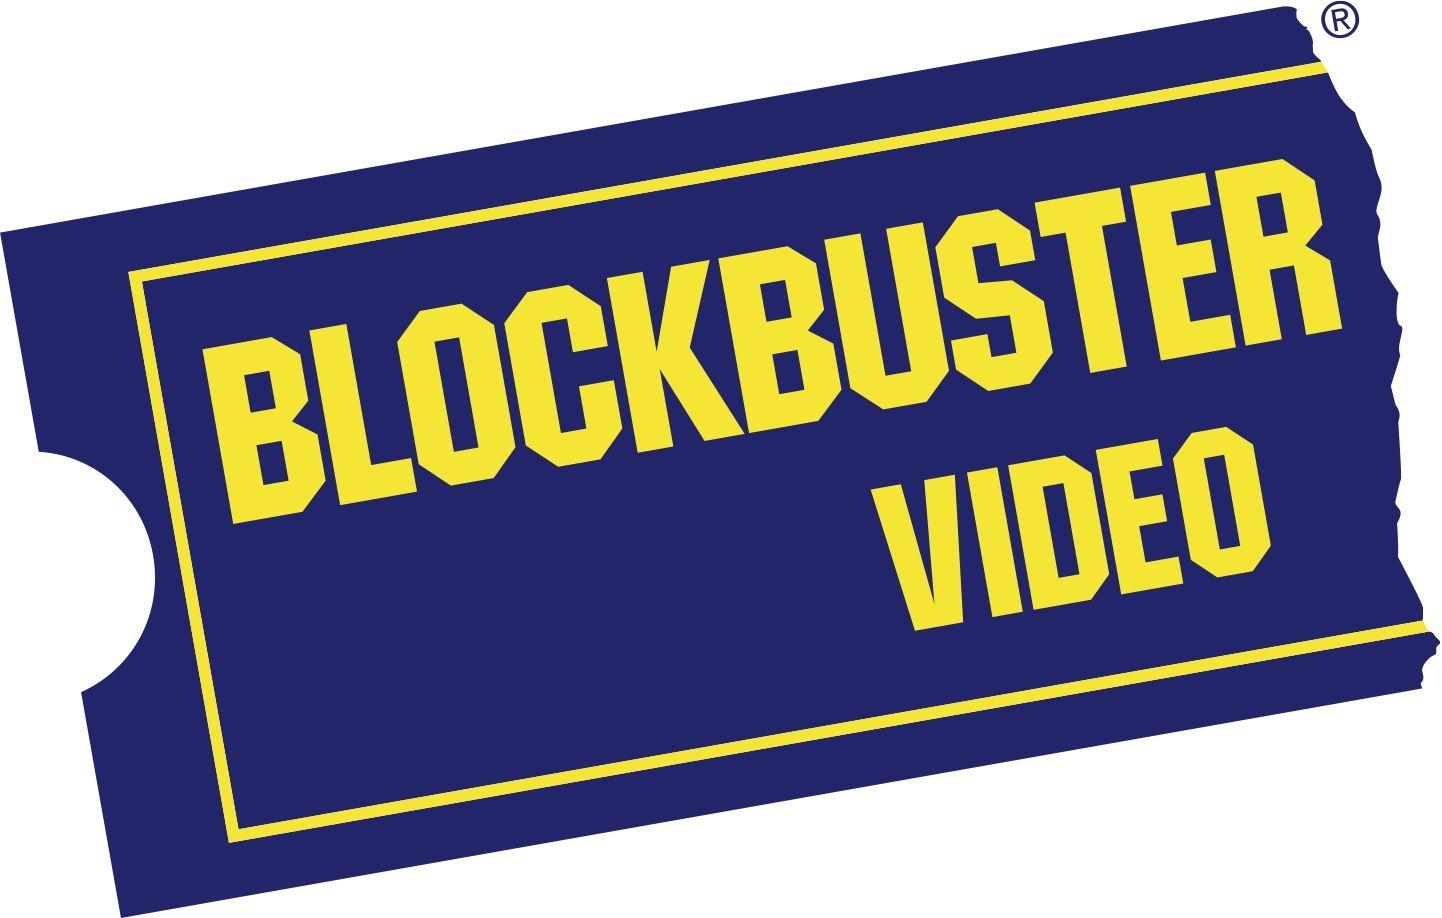 Blockbusters Logo - Blockbuster Video Is Not Dead...And Its Twitter Is Kind Of Funny